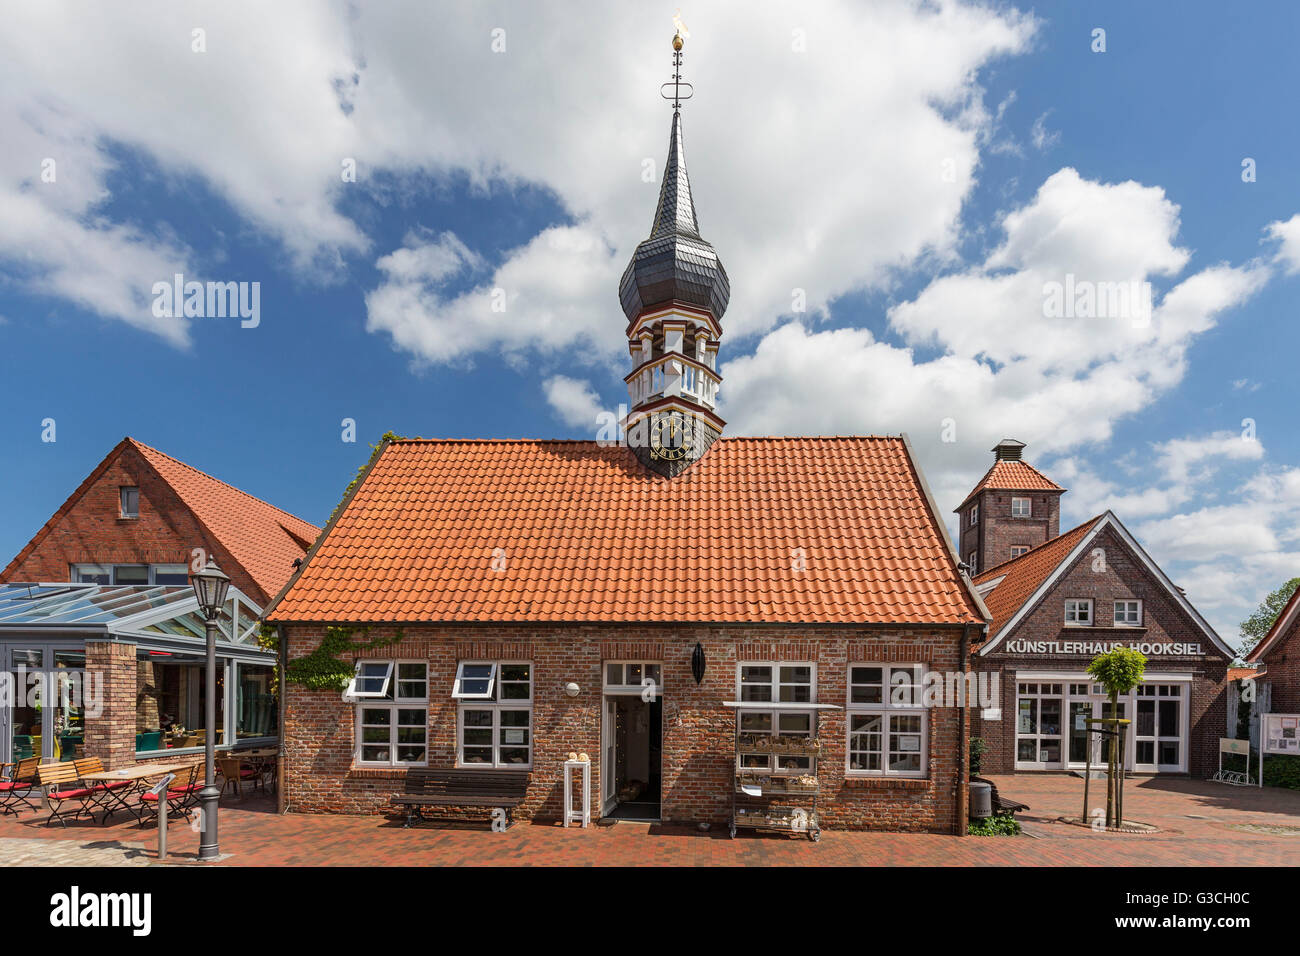 'Muschelmuseum' of Hooksiel with onion-domed tower, former 'Künstlerhaus', school, town hall, tourist information, 'Künstlerhaus' of Hooksiel on the right side, district of the municipality Wangerland, district of Friesland, Stock Photo